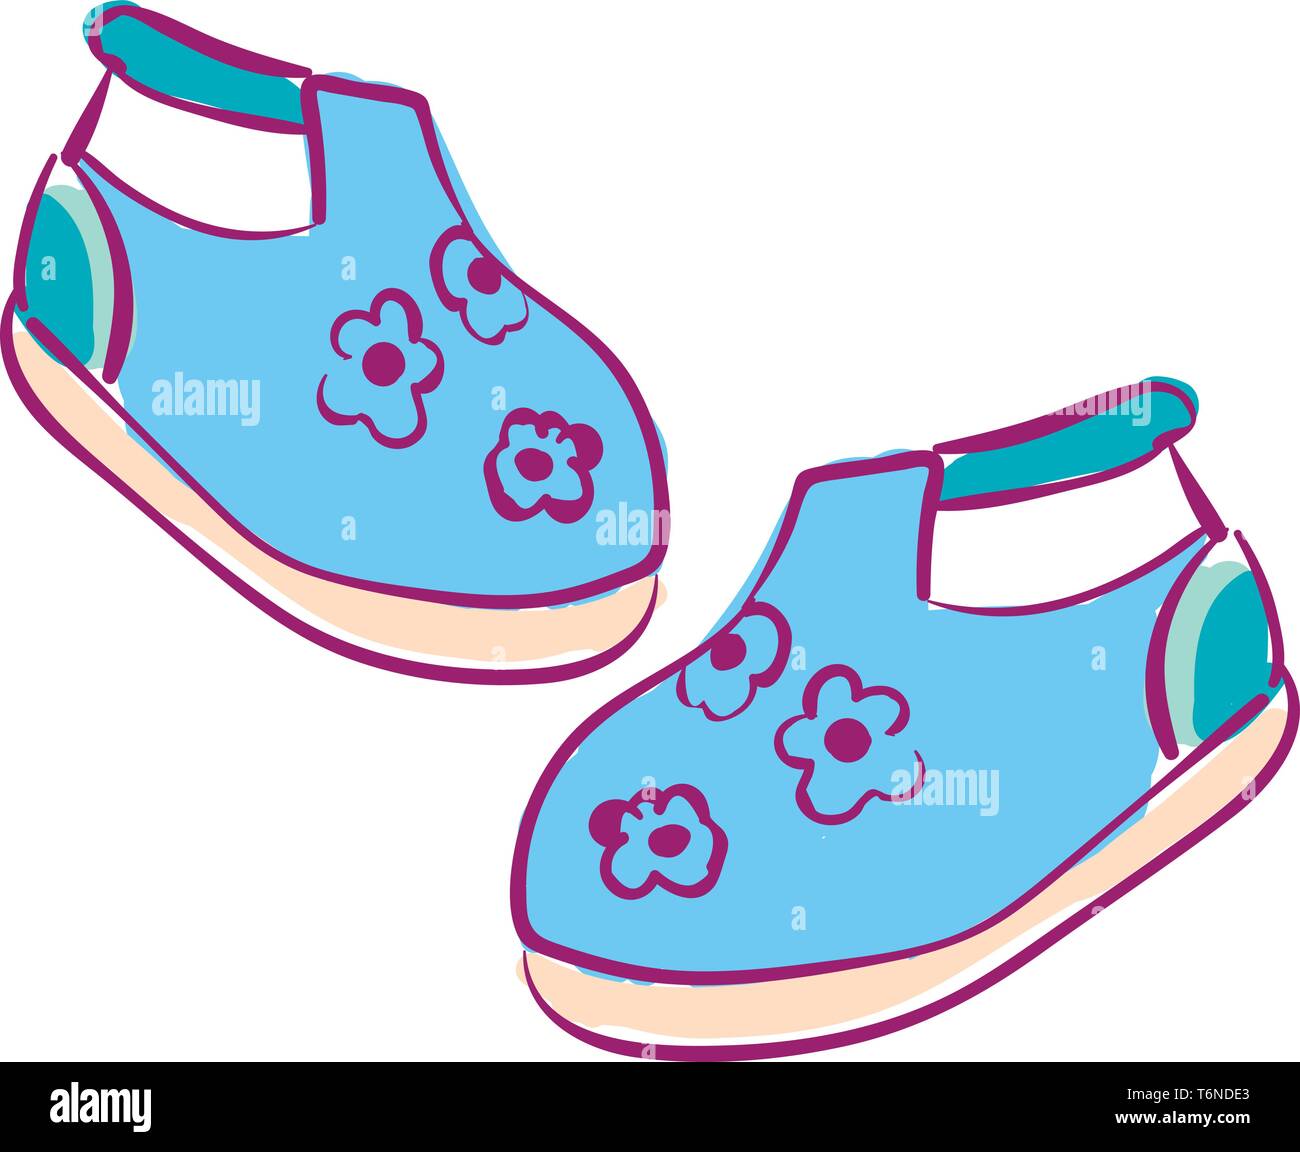 Clipart of a pair of baby's shoes blue in color with white-colored elastic  straps and printed with beautiful purple-colored floral designs and a rose  Stock Vector Image & Art - Alamy